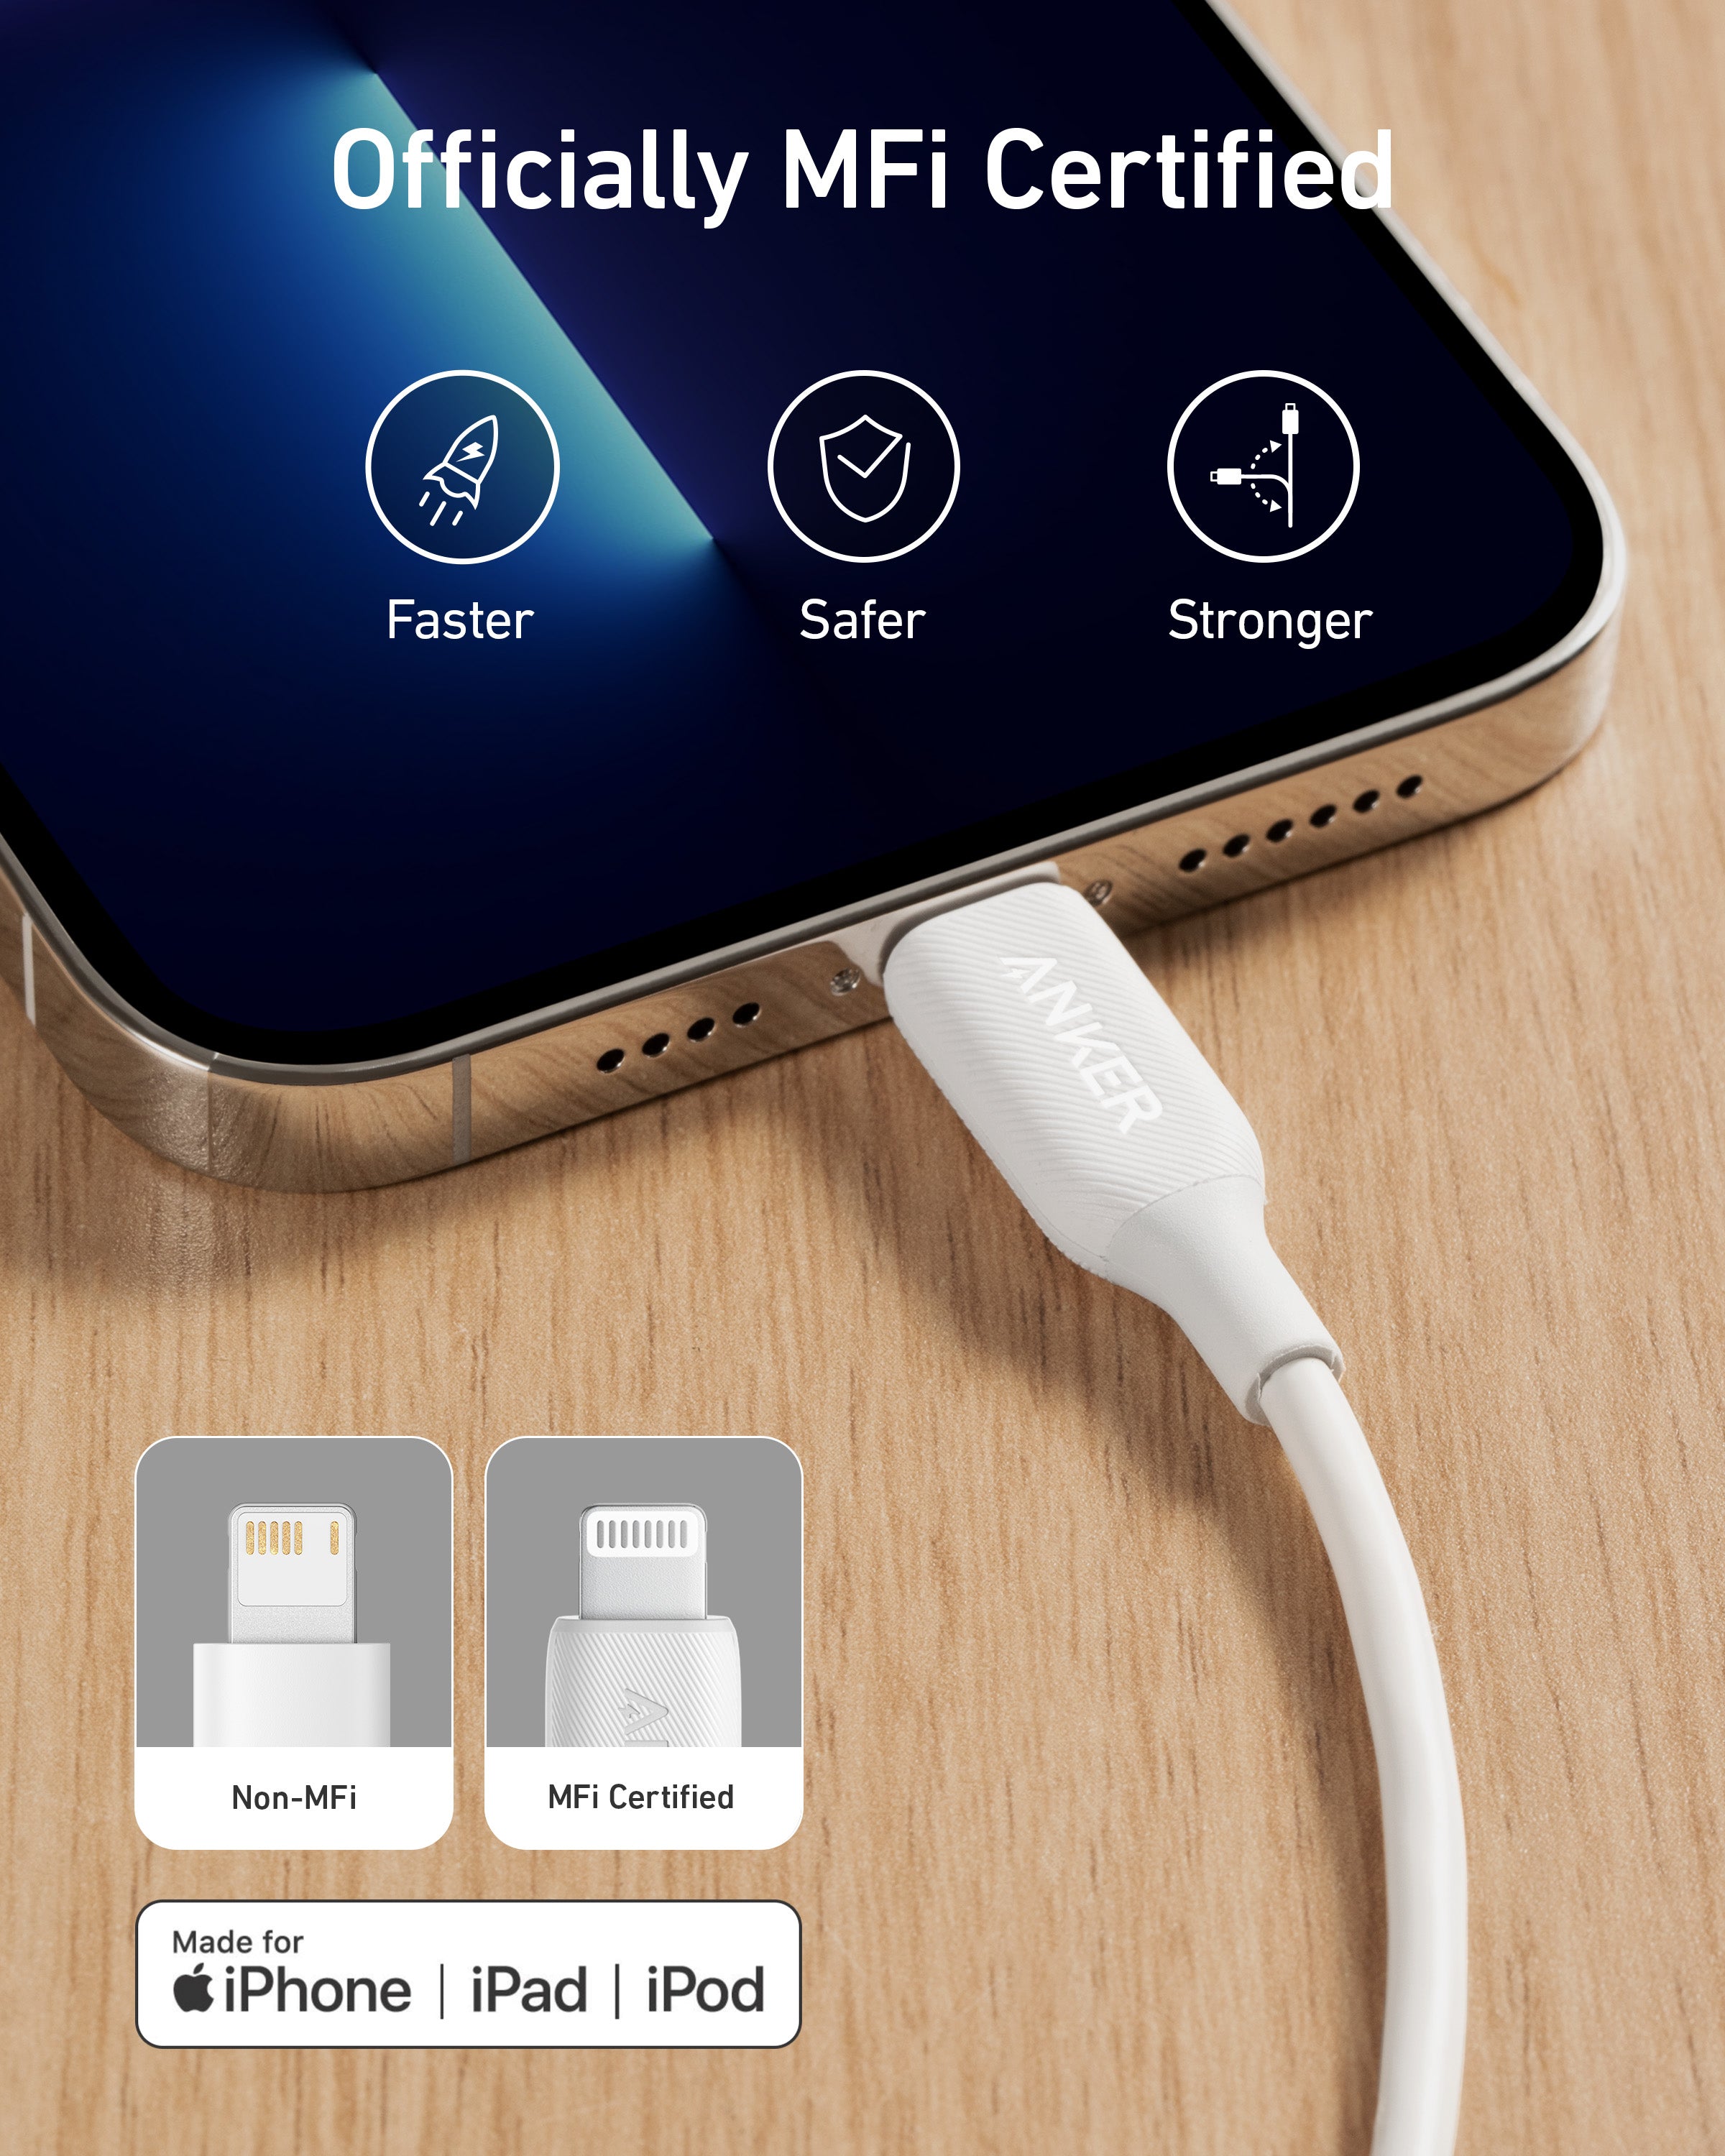 Cable USB a Lightning iphone 8pin - INNOVARTECH